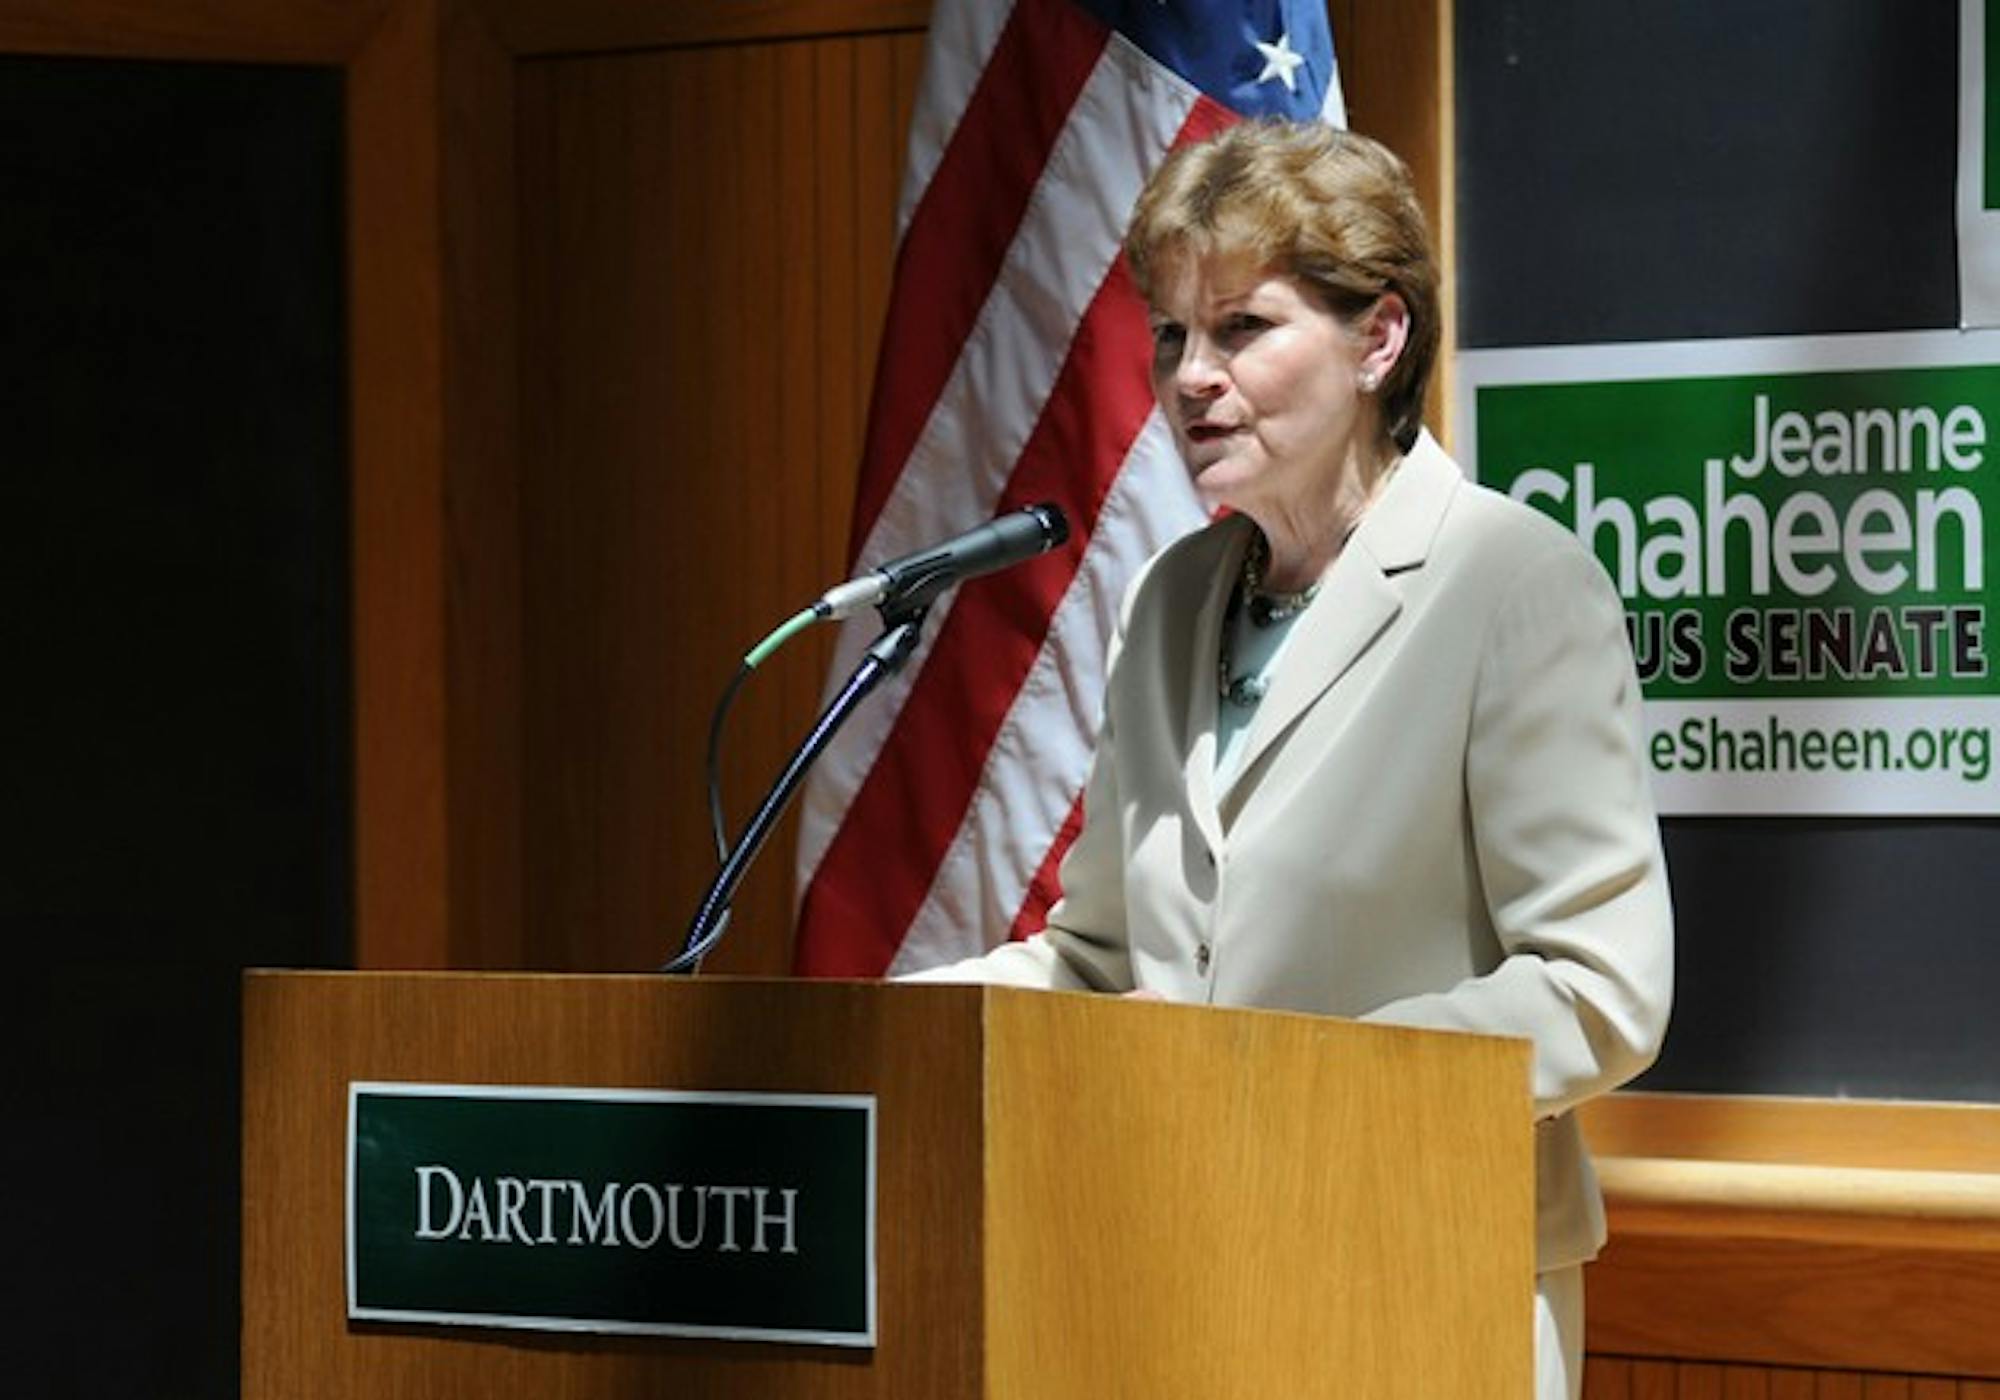 Former New Hampshire Governor and current Democratic candidate for Senate Jeanne Shaheen spoke in Hinman Forum on Monday.